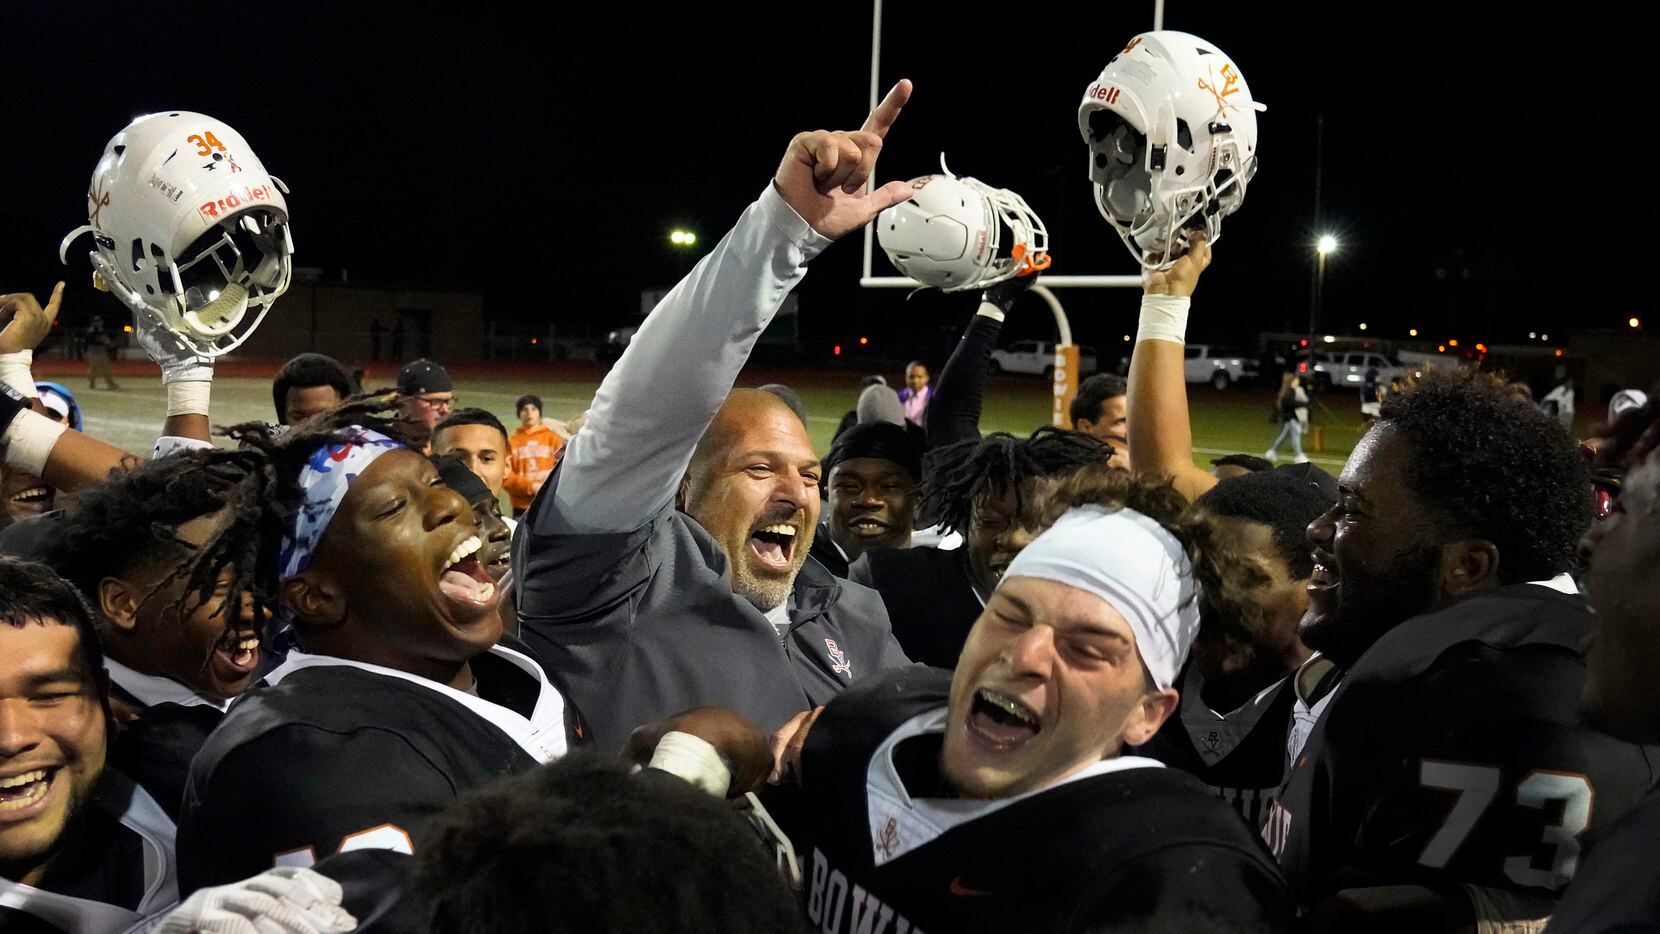 Arlington Bowie head coach Danny DeArman celebrates with his players after a victory over...